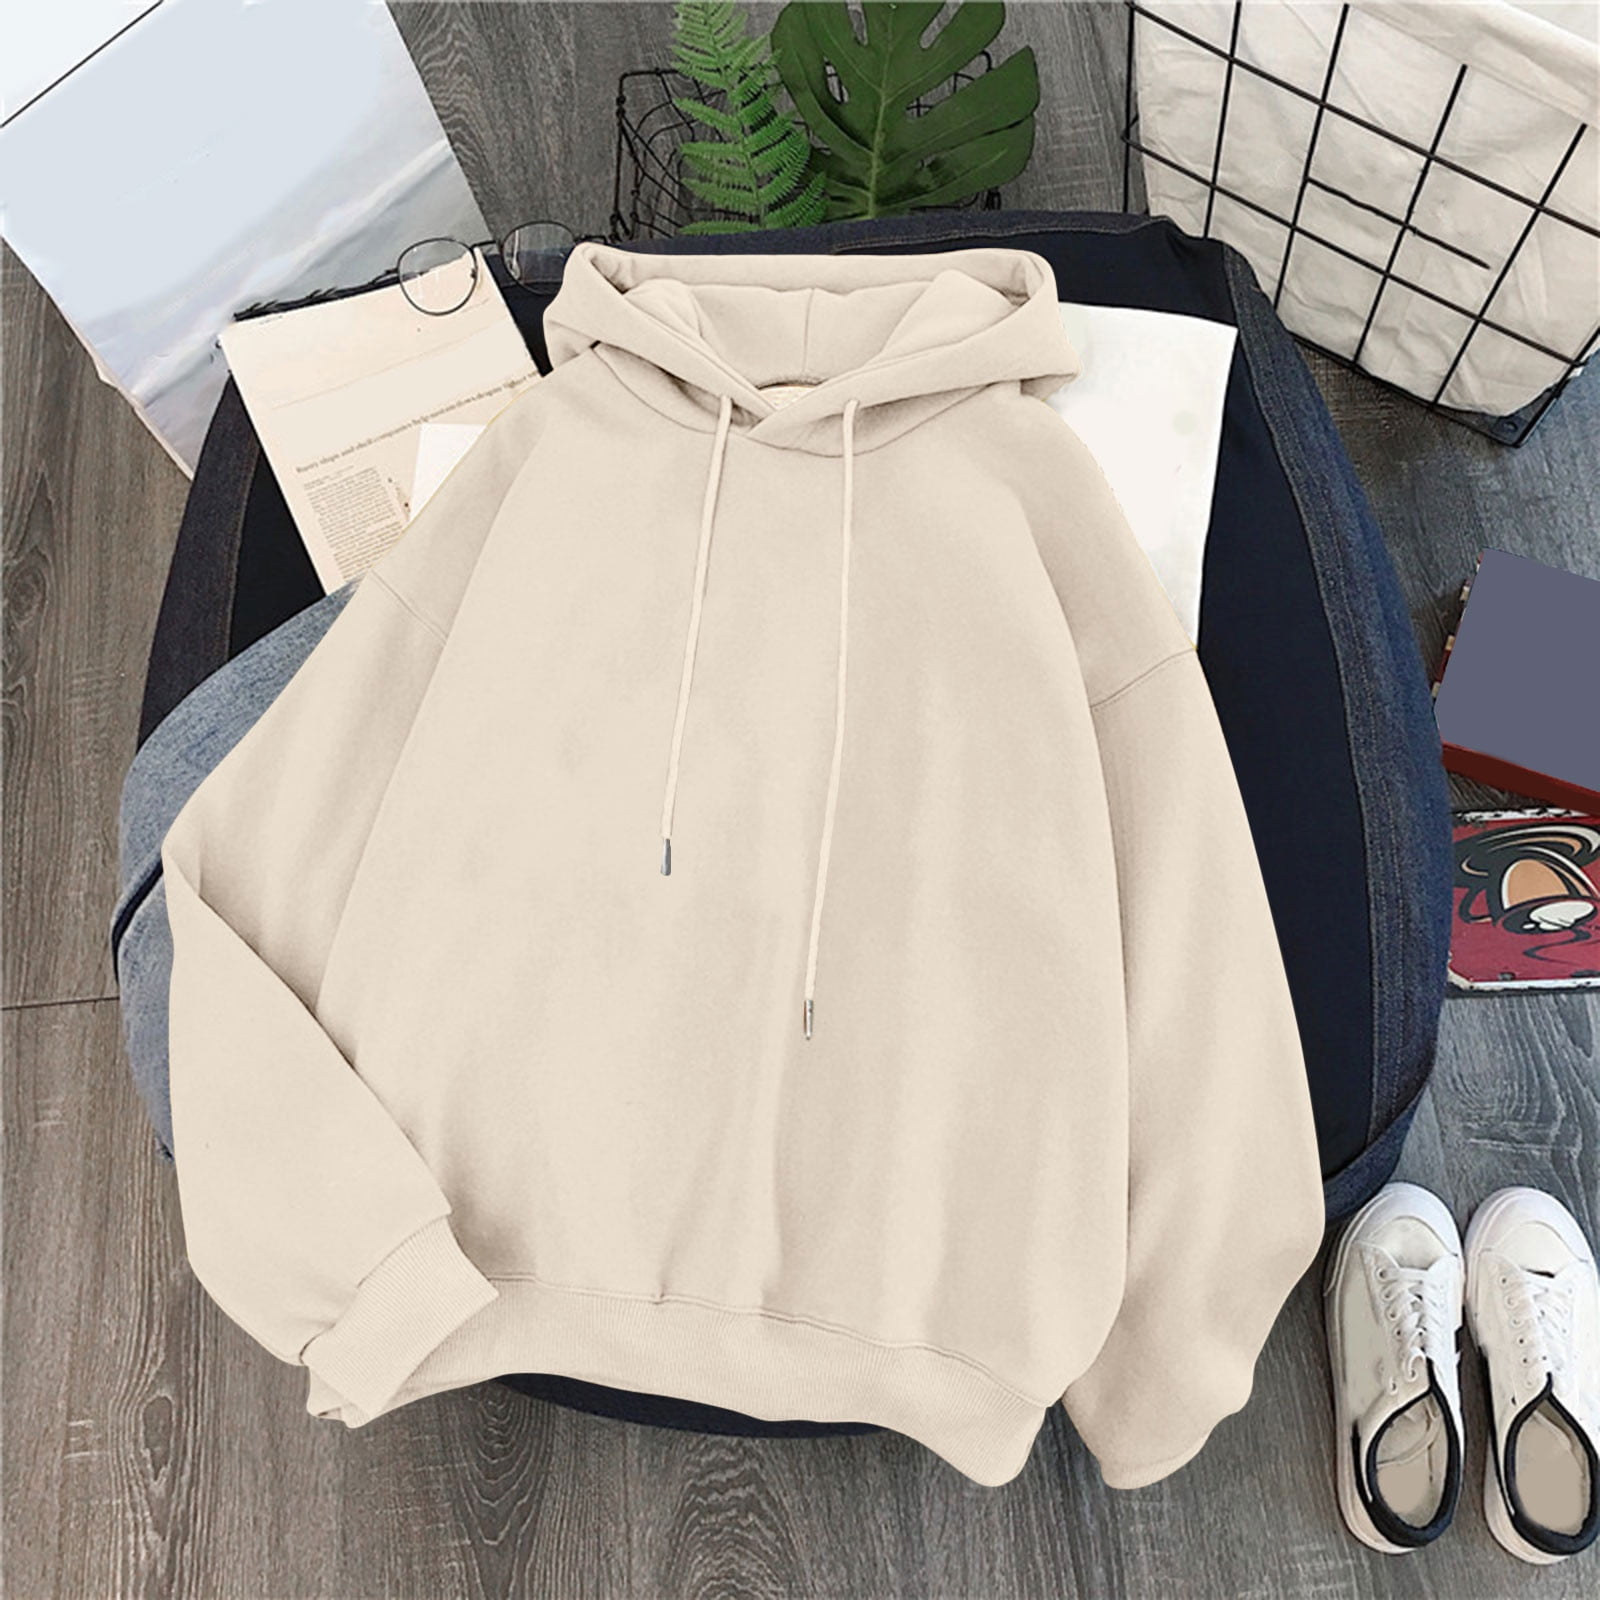 Sweatshirts for Women Long Sleeve Skateboarding Frog Los Angeles Printed  Hoodie Tops Cute Pullover Sweater Shirts for Girls (Beige, S) at   Women's Clothing store